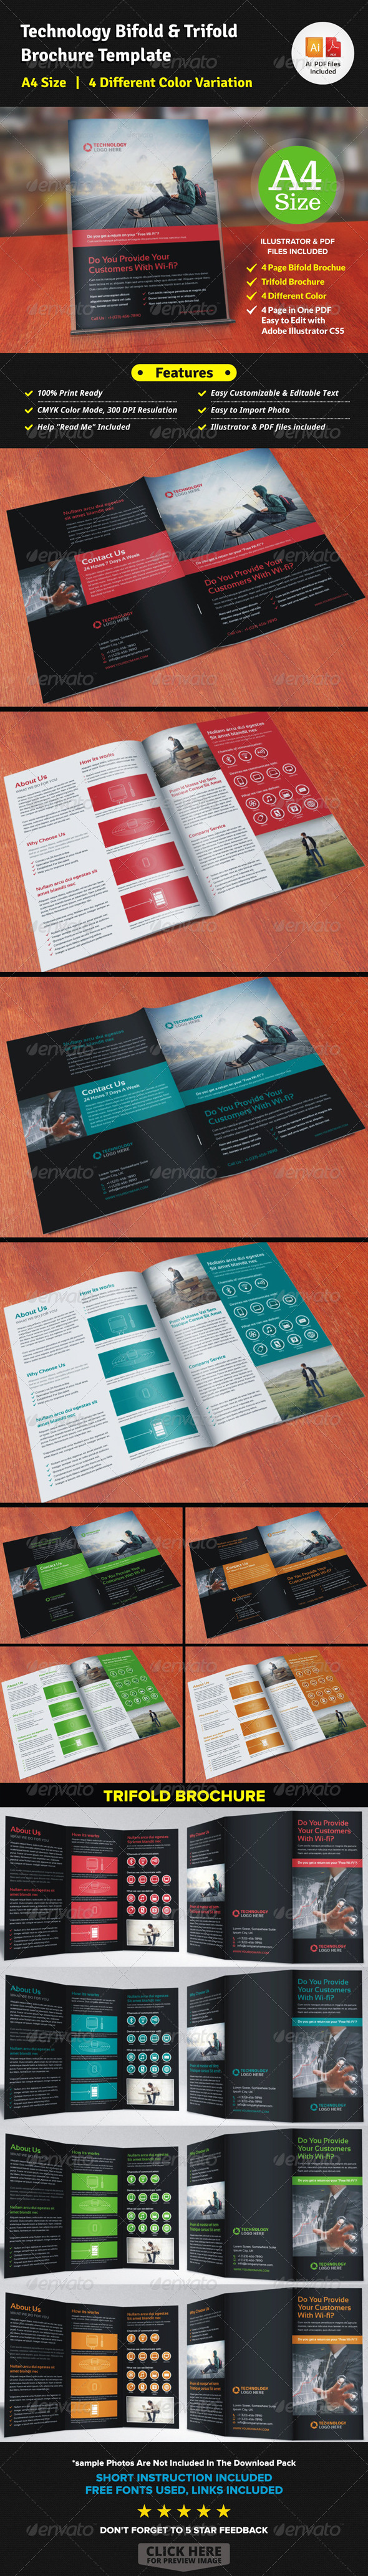 GraphicRiver Technology Bifold & Trifold Brochure 7665994